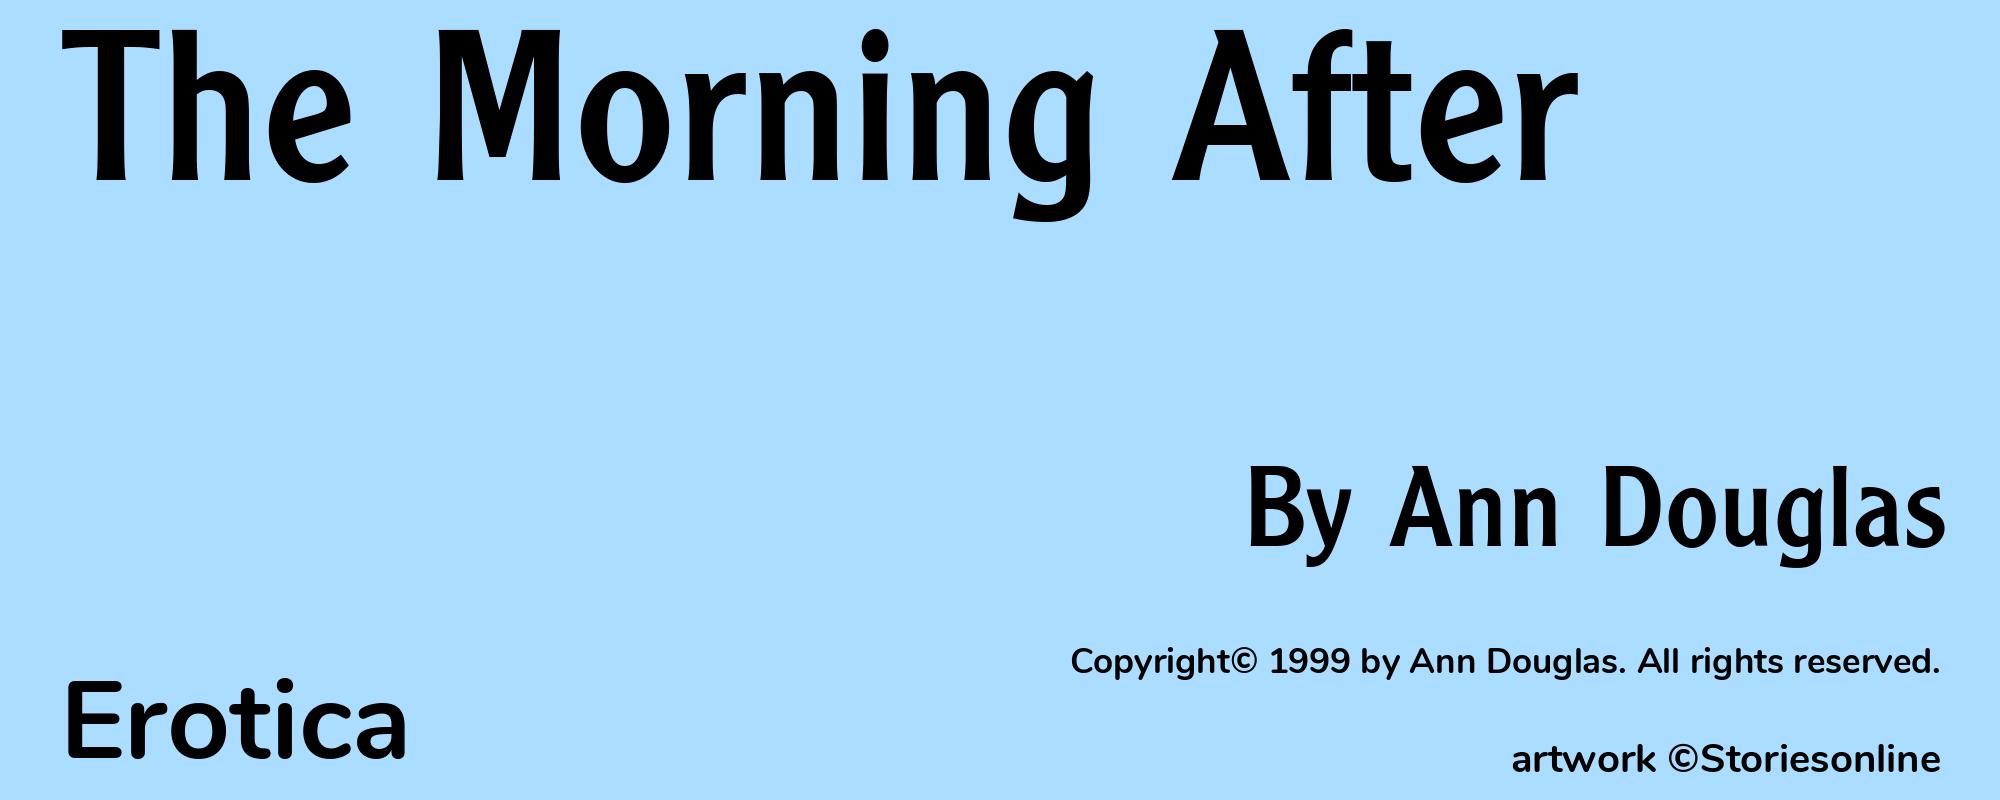 The Morning After - Cover